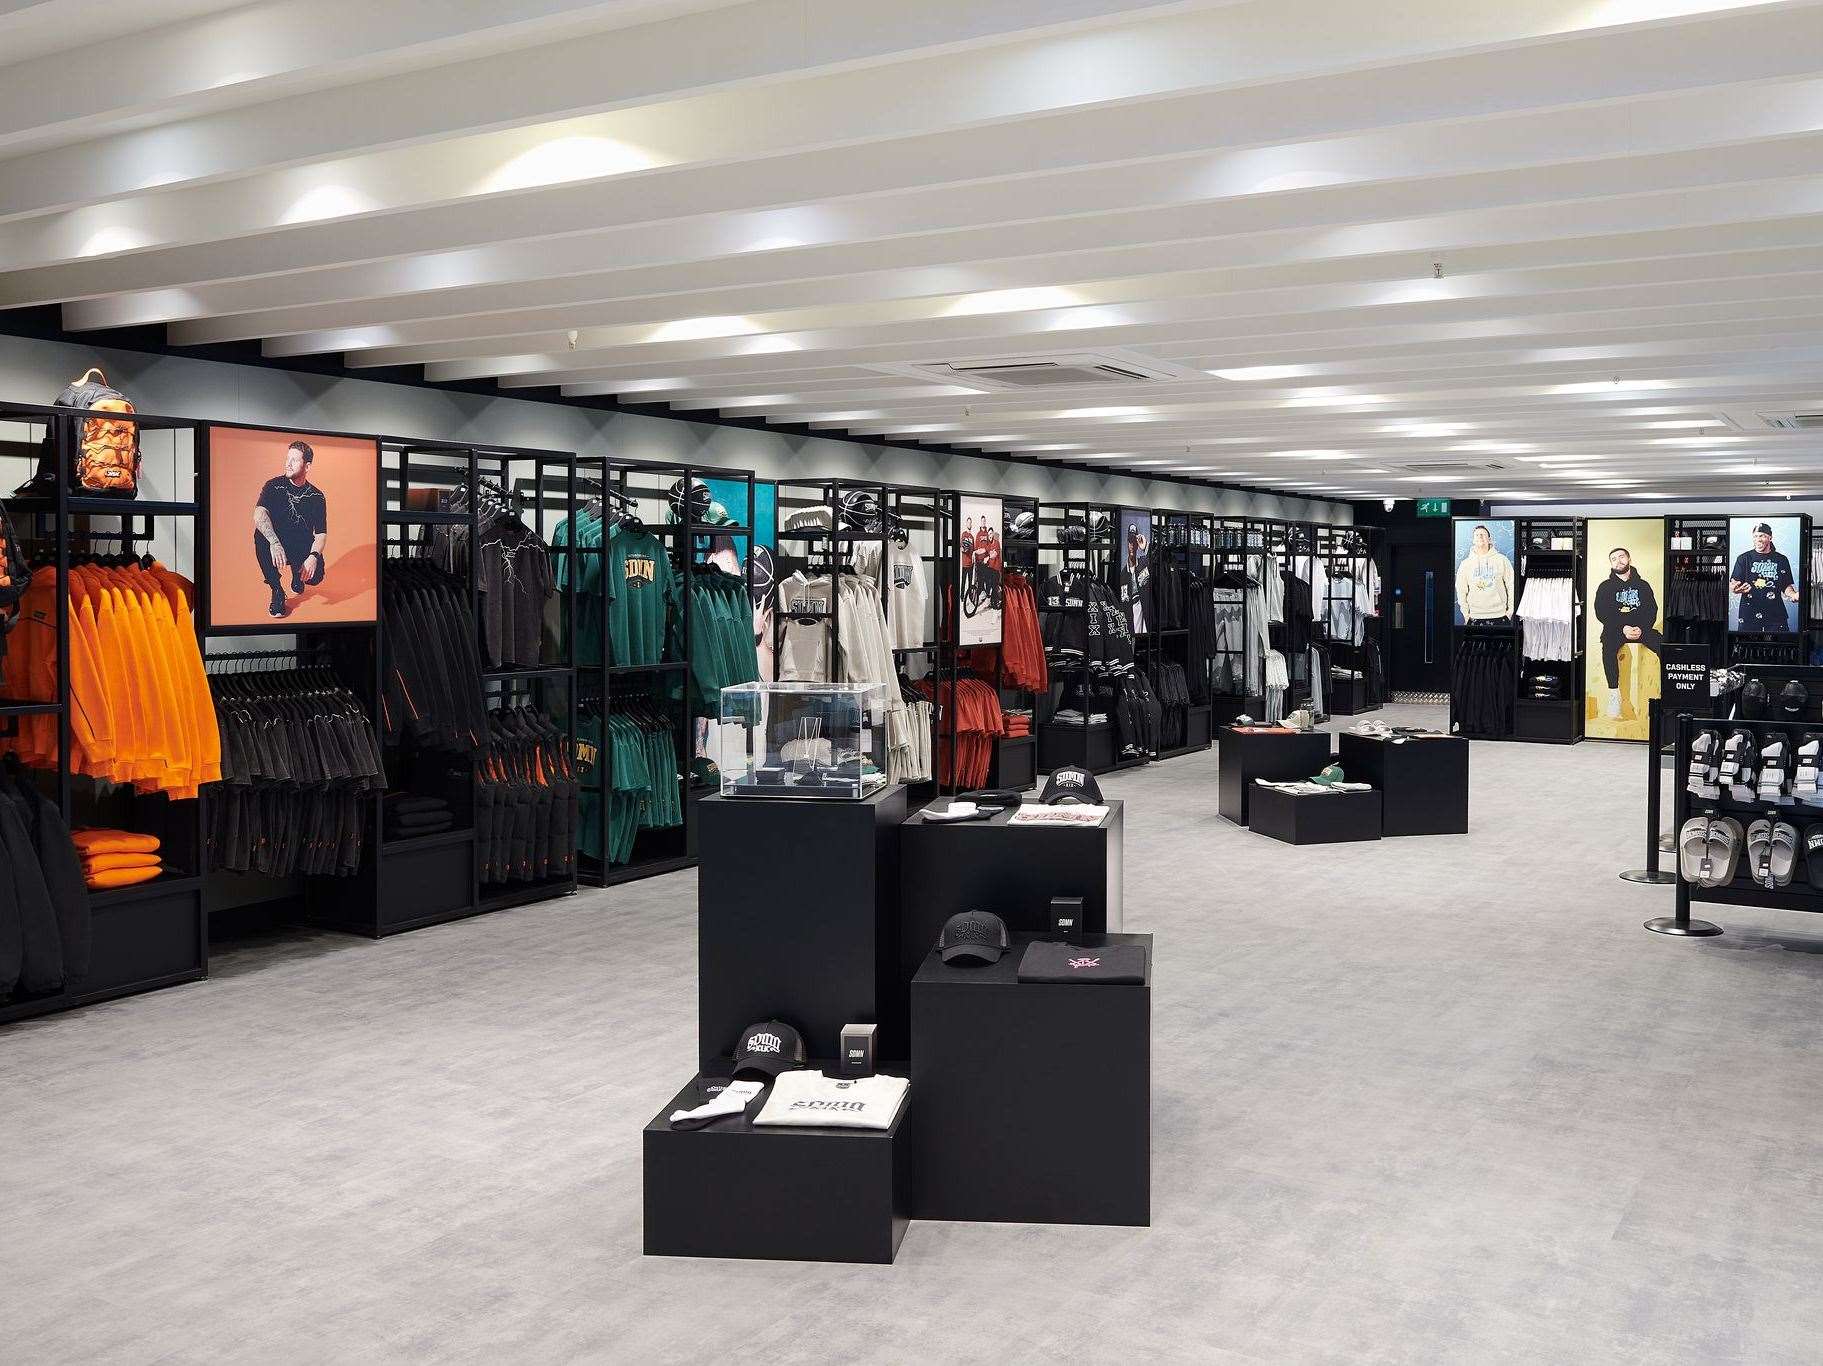 YouTube Group The Sidemen will open their first ever brick and mortar store in Bluewater tomorrow (July 15). Photo: umpf/Bluewater